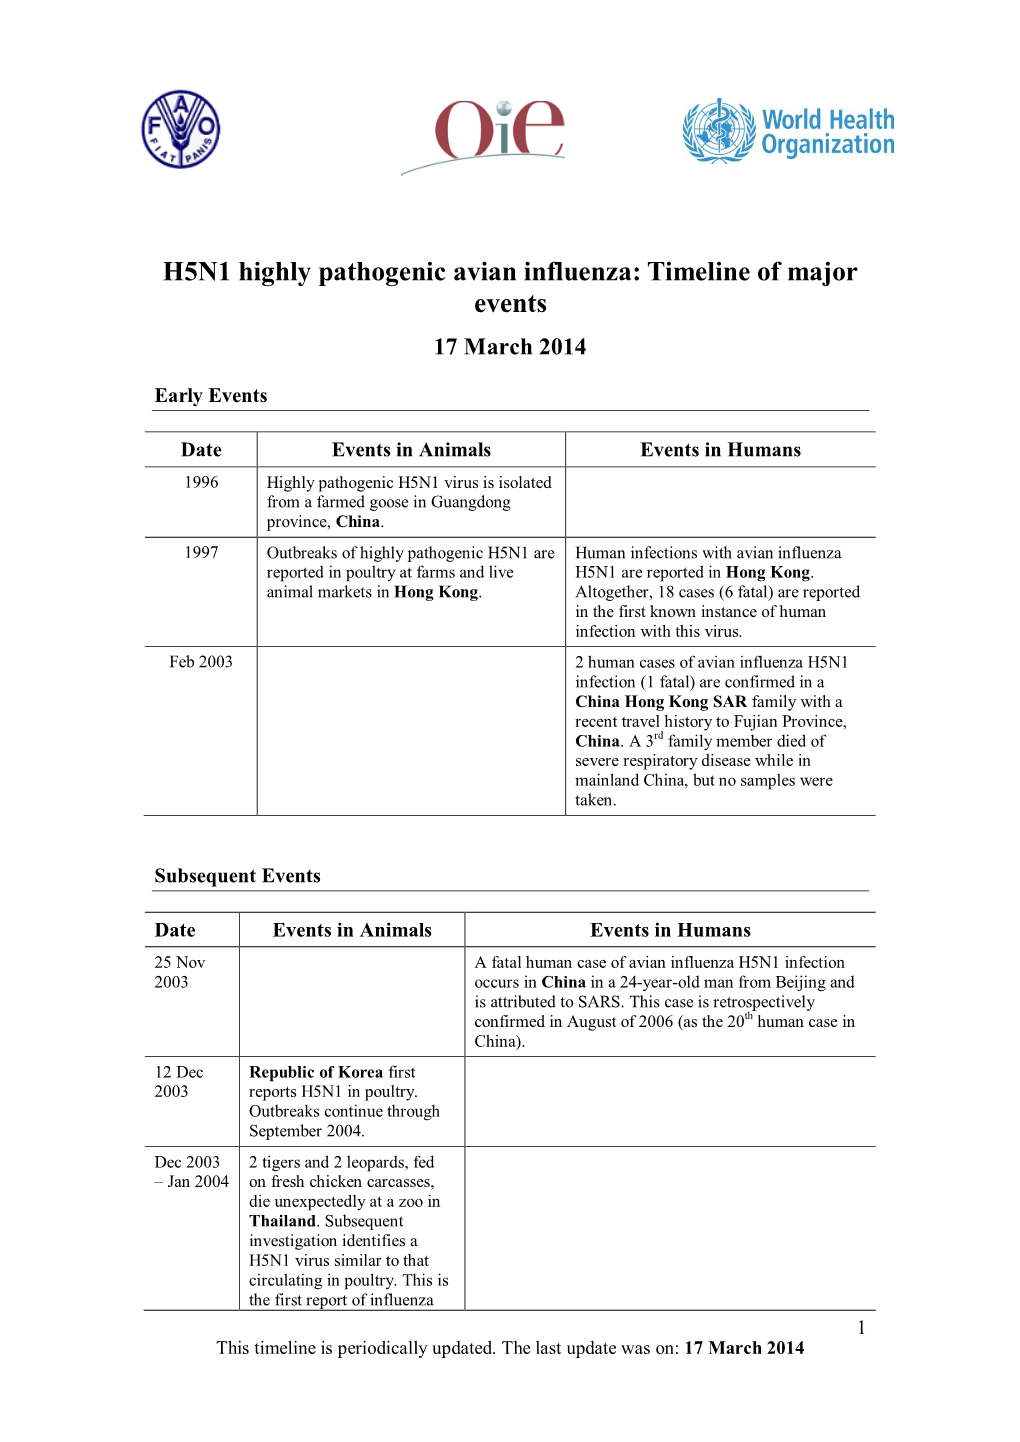 H5N1 Highly Pathogenic Avian Influenza: Timeline of Major Events 17 March 2014